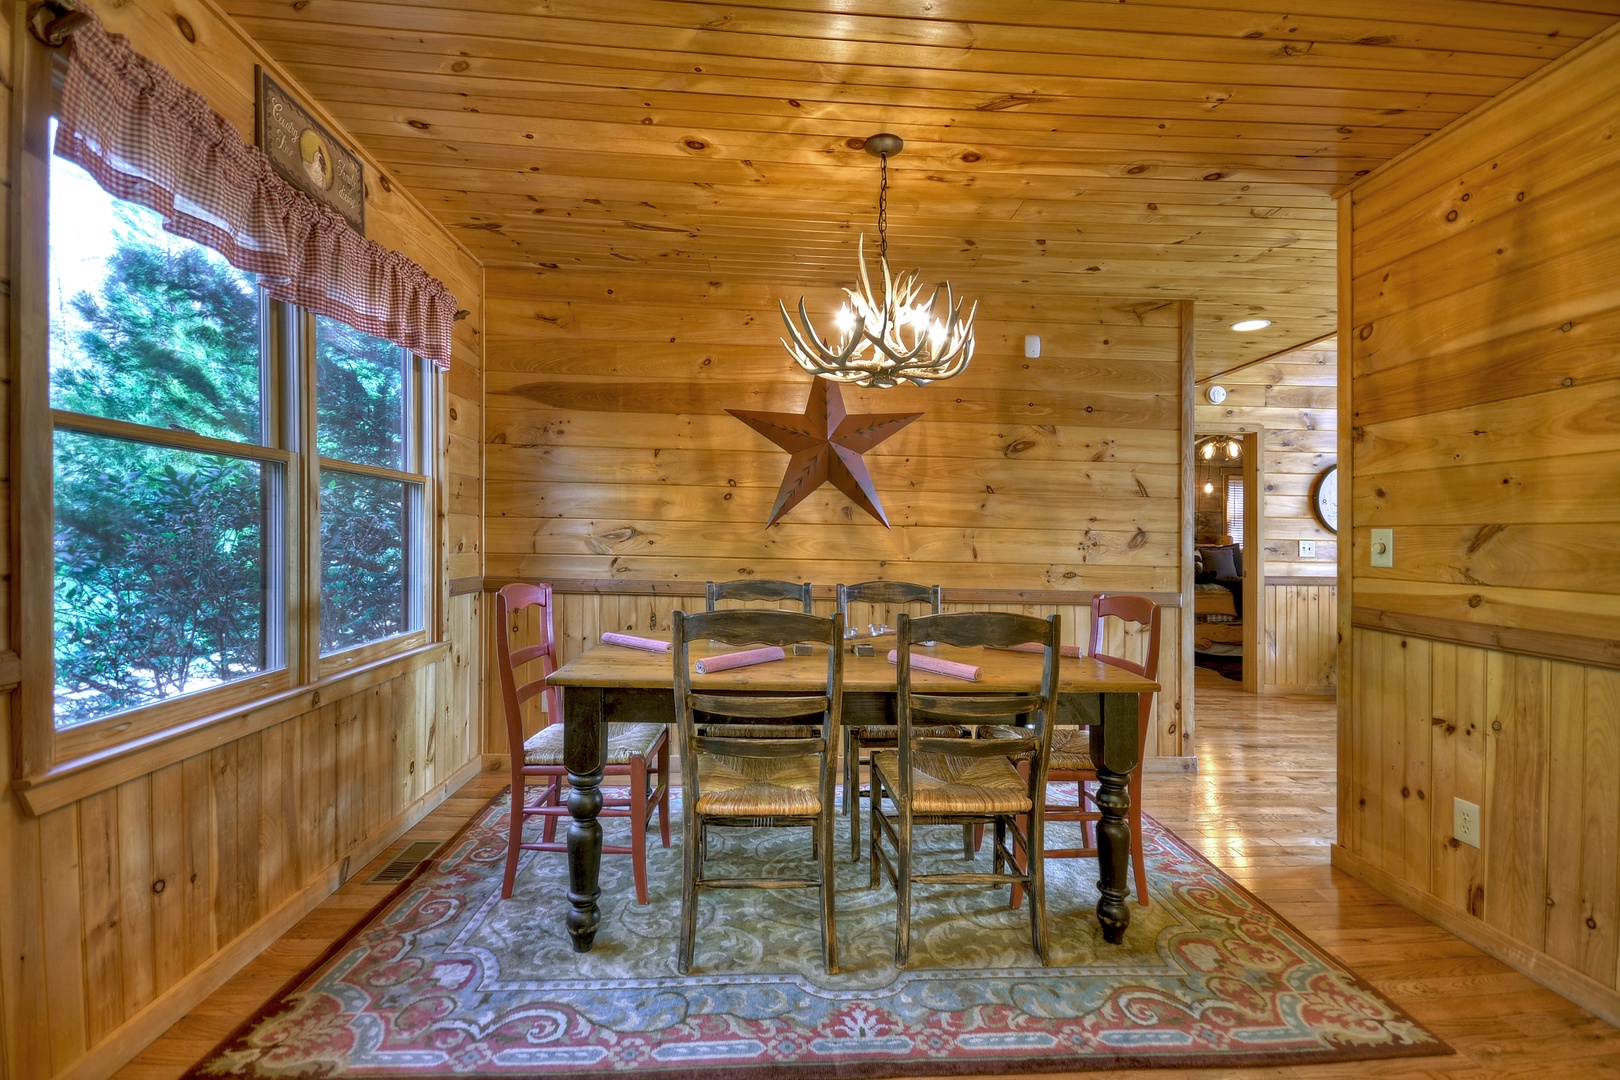 Grand Mountain Lodge-Rustic dining area with table and chairs for 6